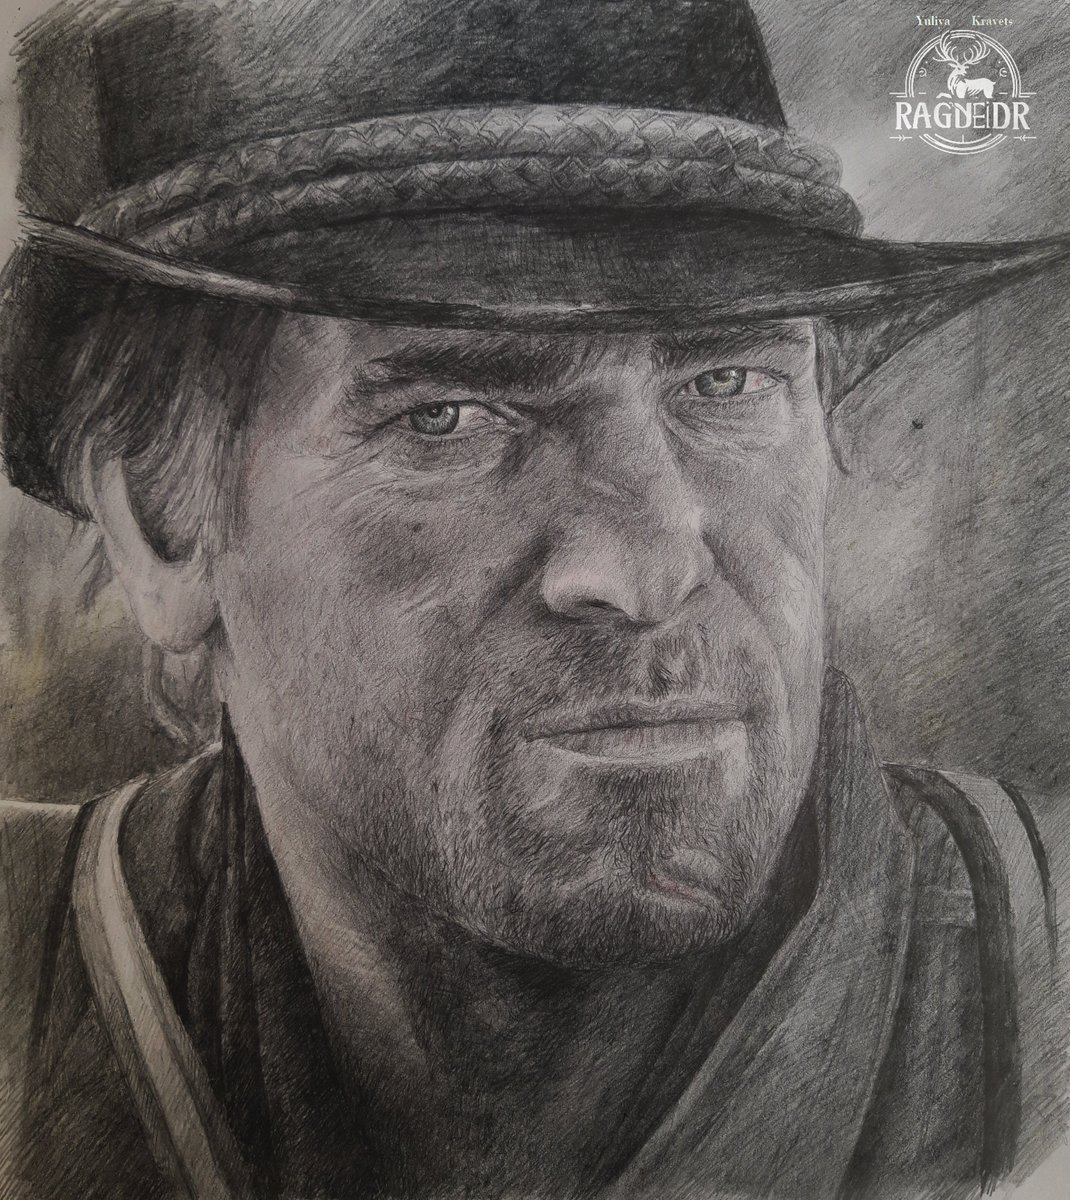 Arthur Morgan , mу art, 297×420 , pencil drawing, 2024
I was asked to draw a beta version of this character, and to be honest, I like it even more
#RDR2 #RockstarGames #rockstar #rockstargames #rdr2 #arthurmorgan #reddeadredemption2 #rogerclark #graphic #pencildrawing #pencilart